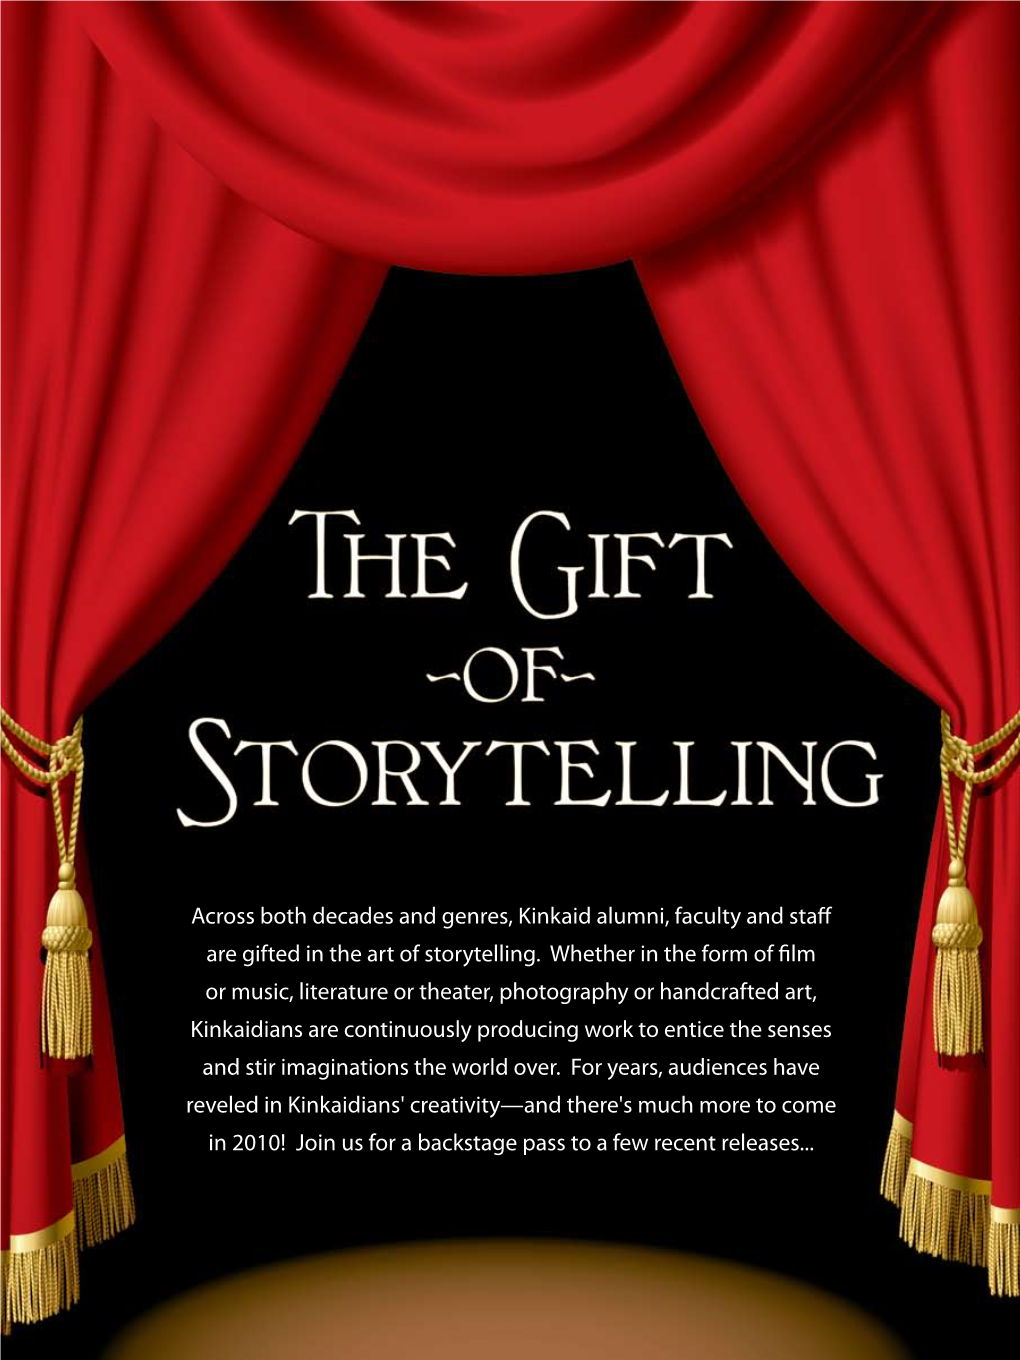 Across Both Decades and Genres, Kinkaid Alumni, Faculty and Staff Are Gifted in the Art of Storytelling